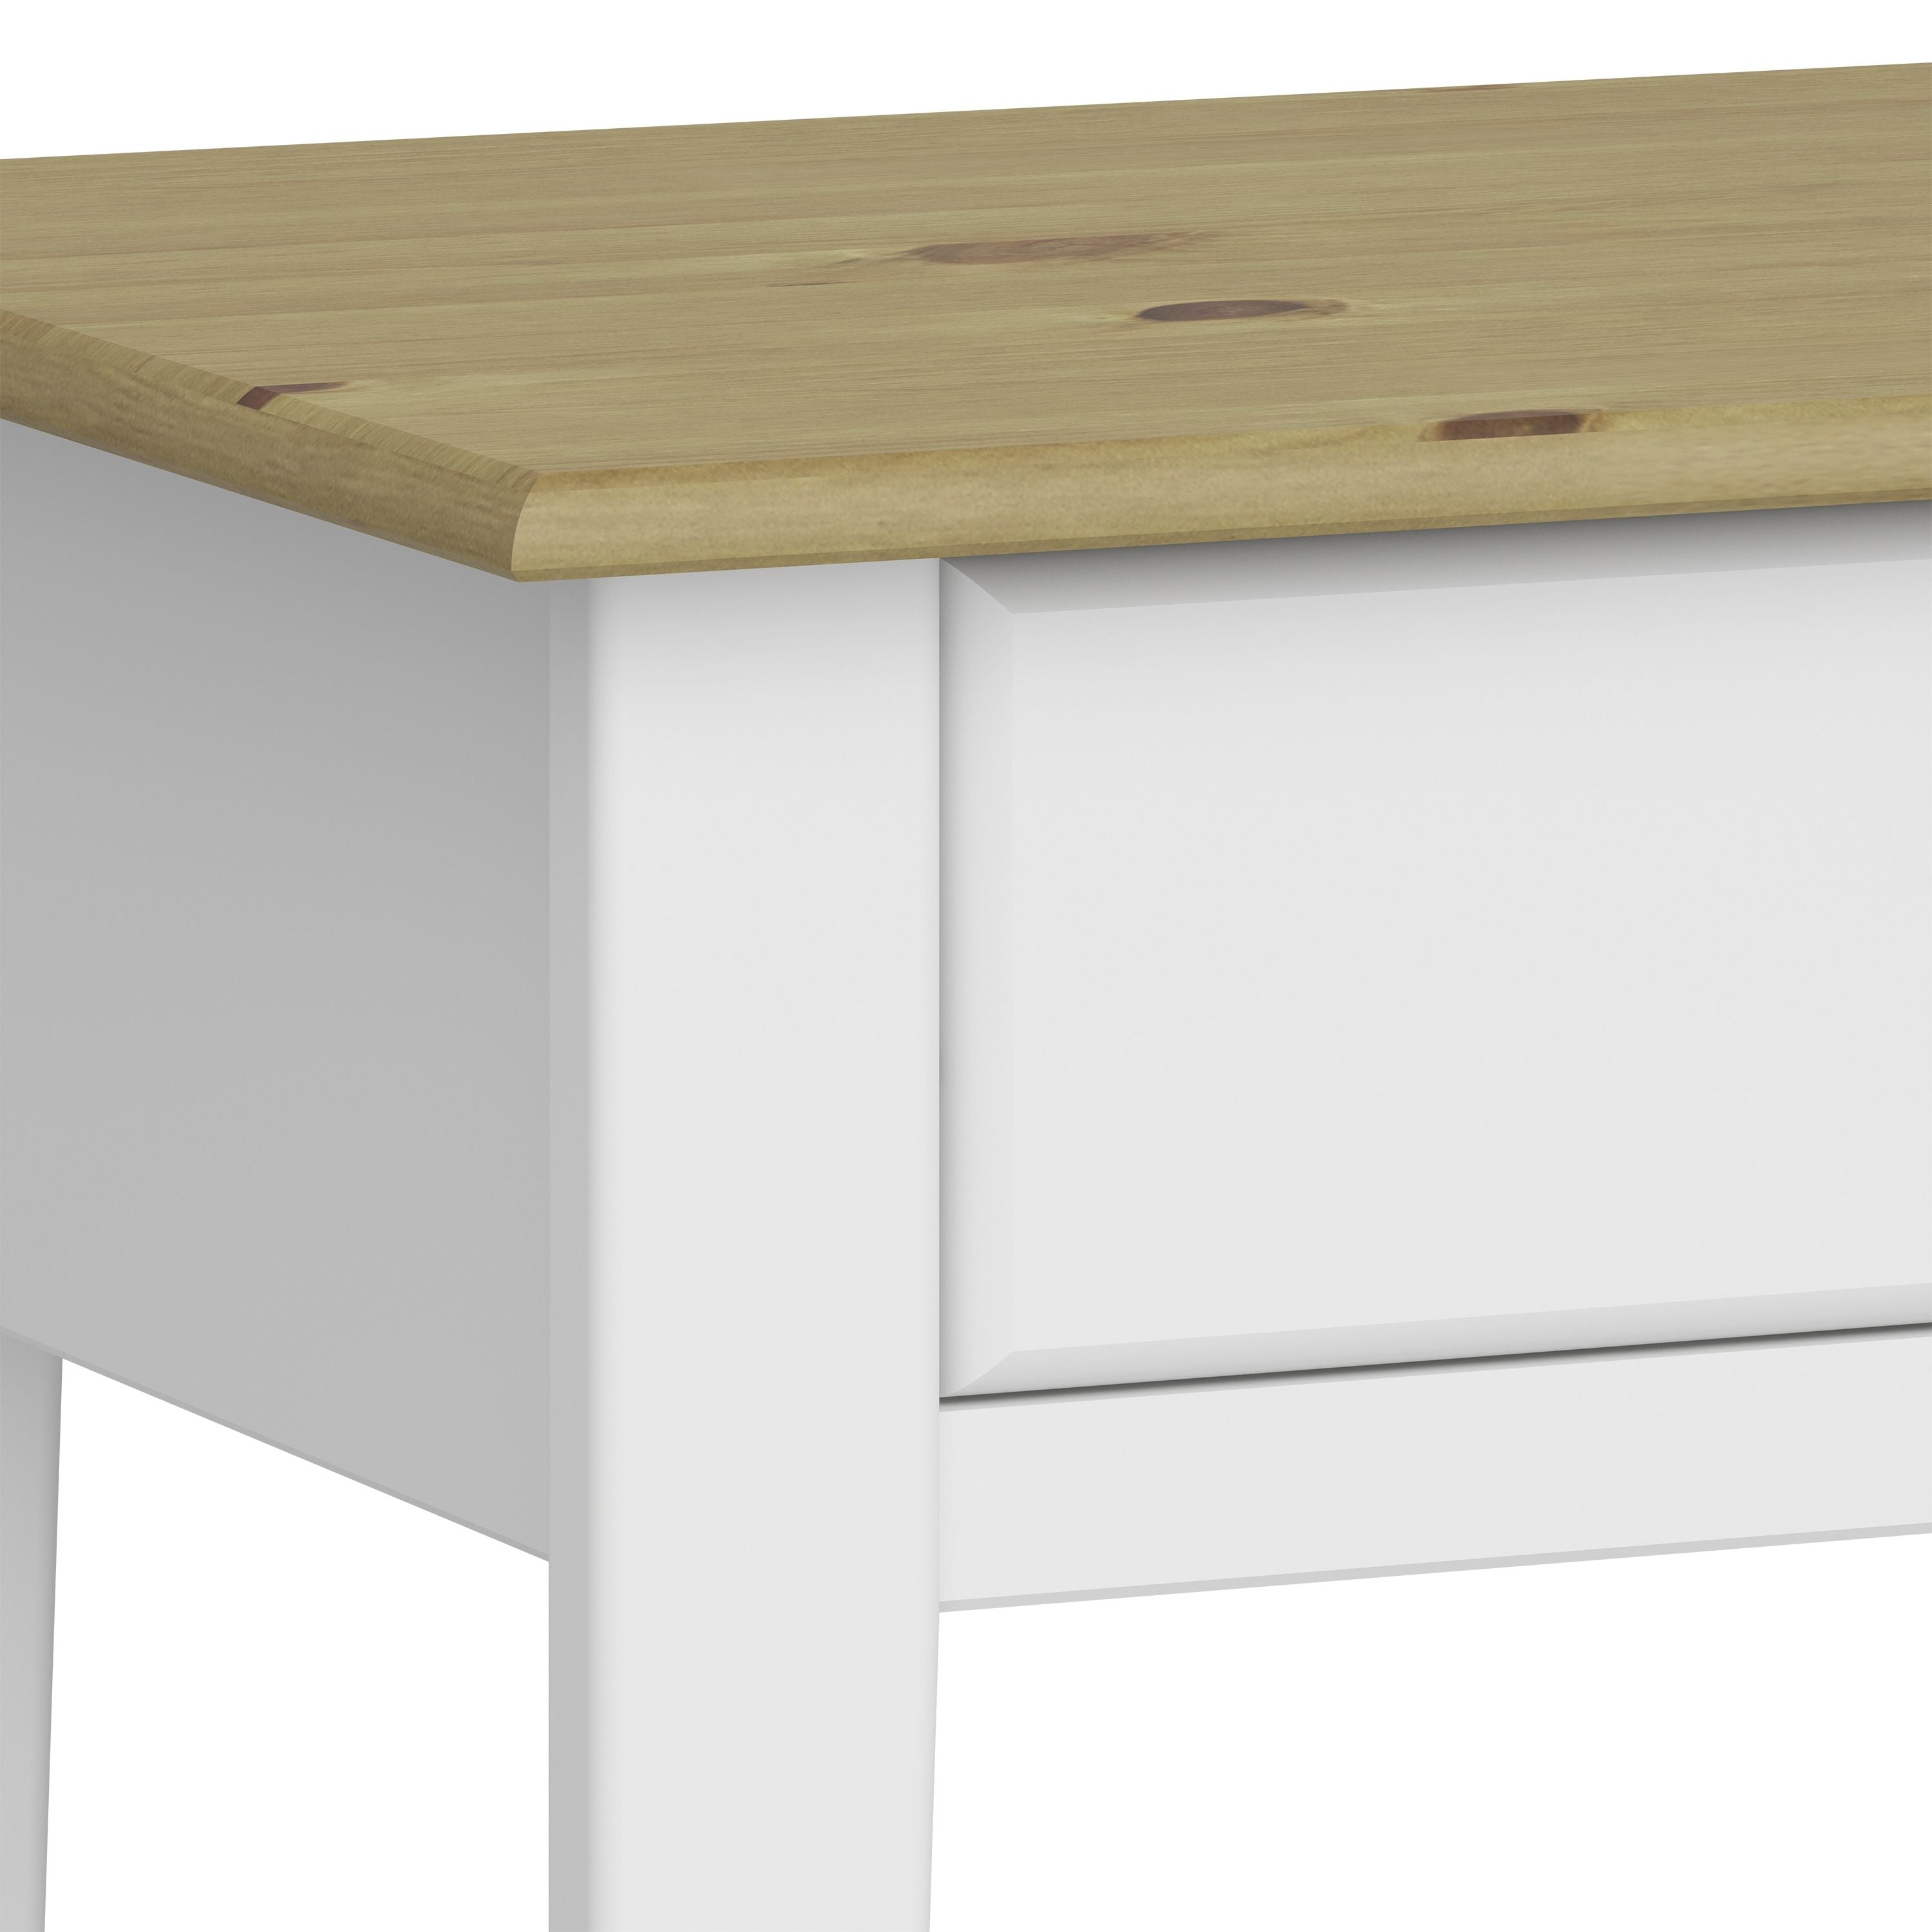 Nola Hall Table in White & Pine